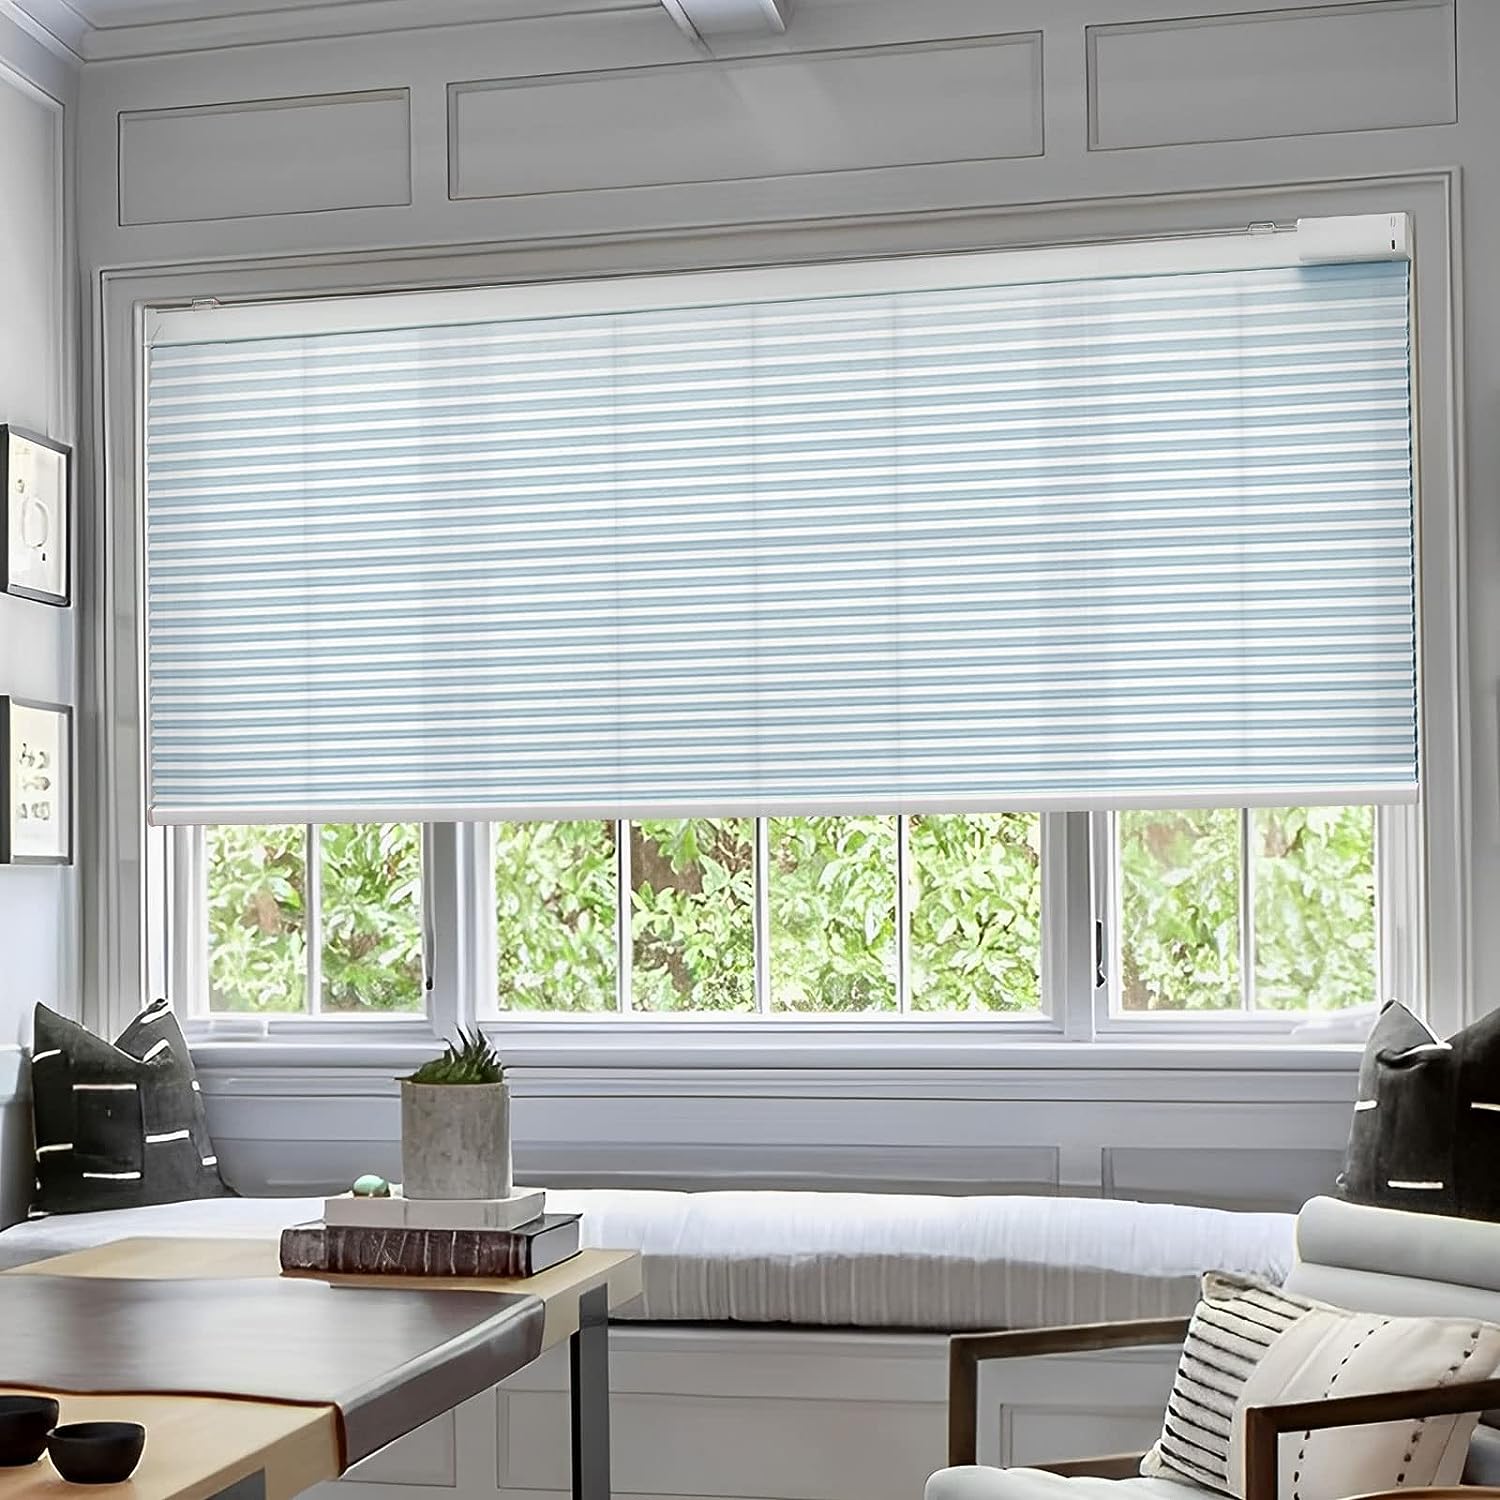 Motorized Cellular Shades Solar Powered Blinds Blackout Shades Smart Blinds Automatic Blinds for Windows Cellular Shades Cordless Electric Remote Honeycomb Blinds Custom Shades,White, 29″ Wx64 H